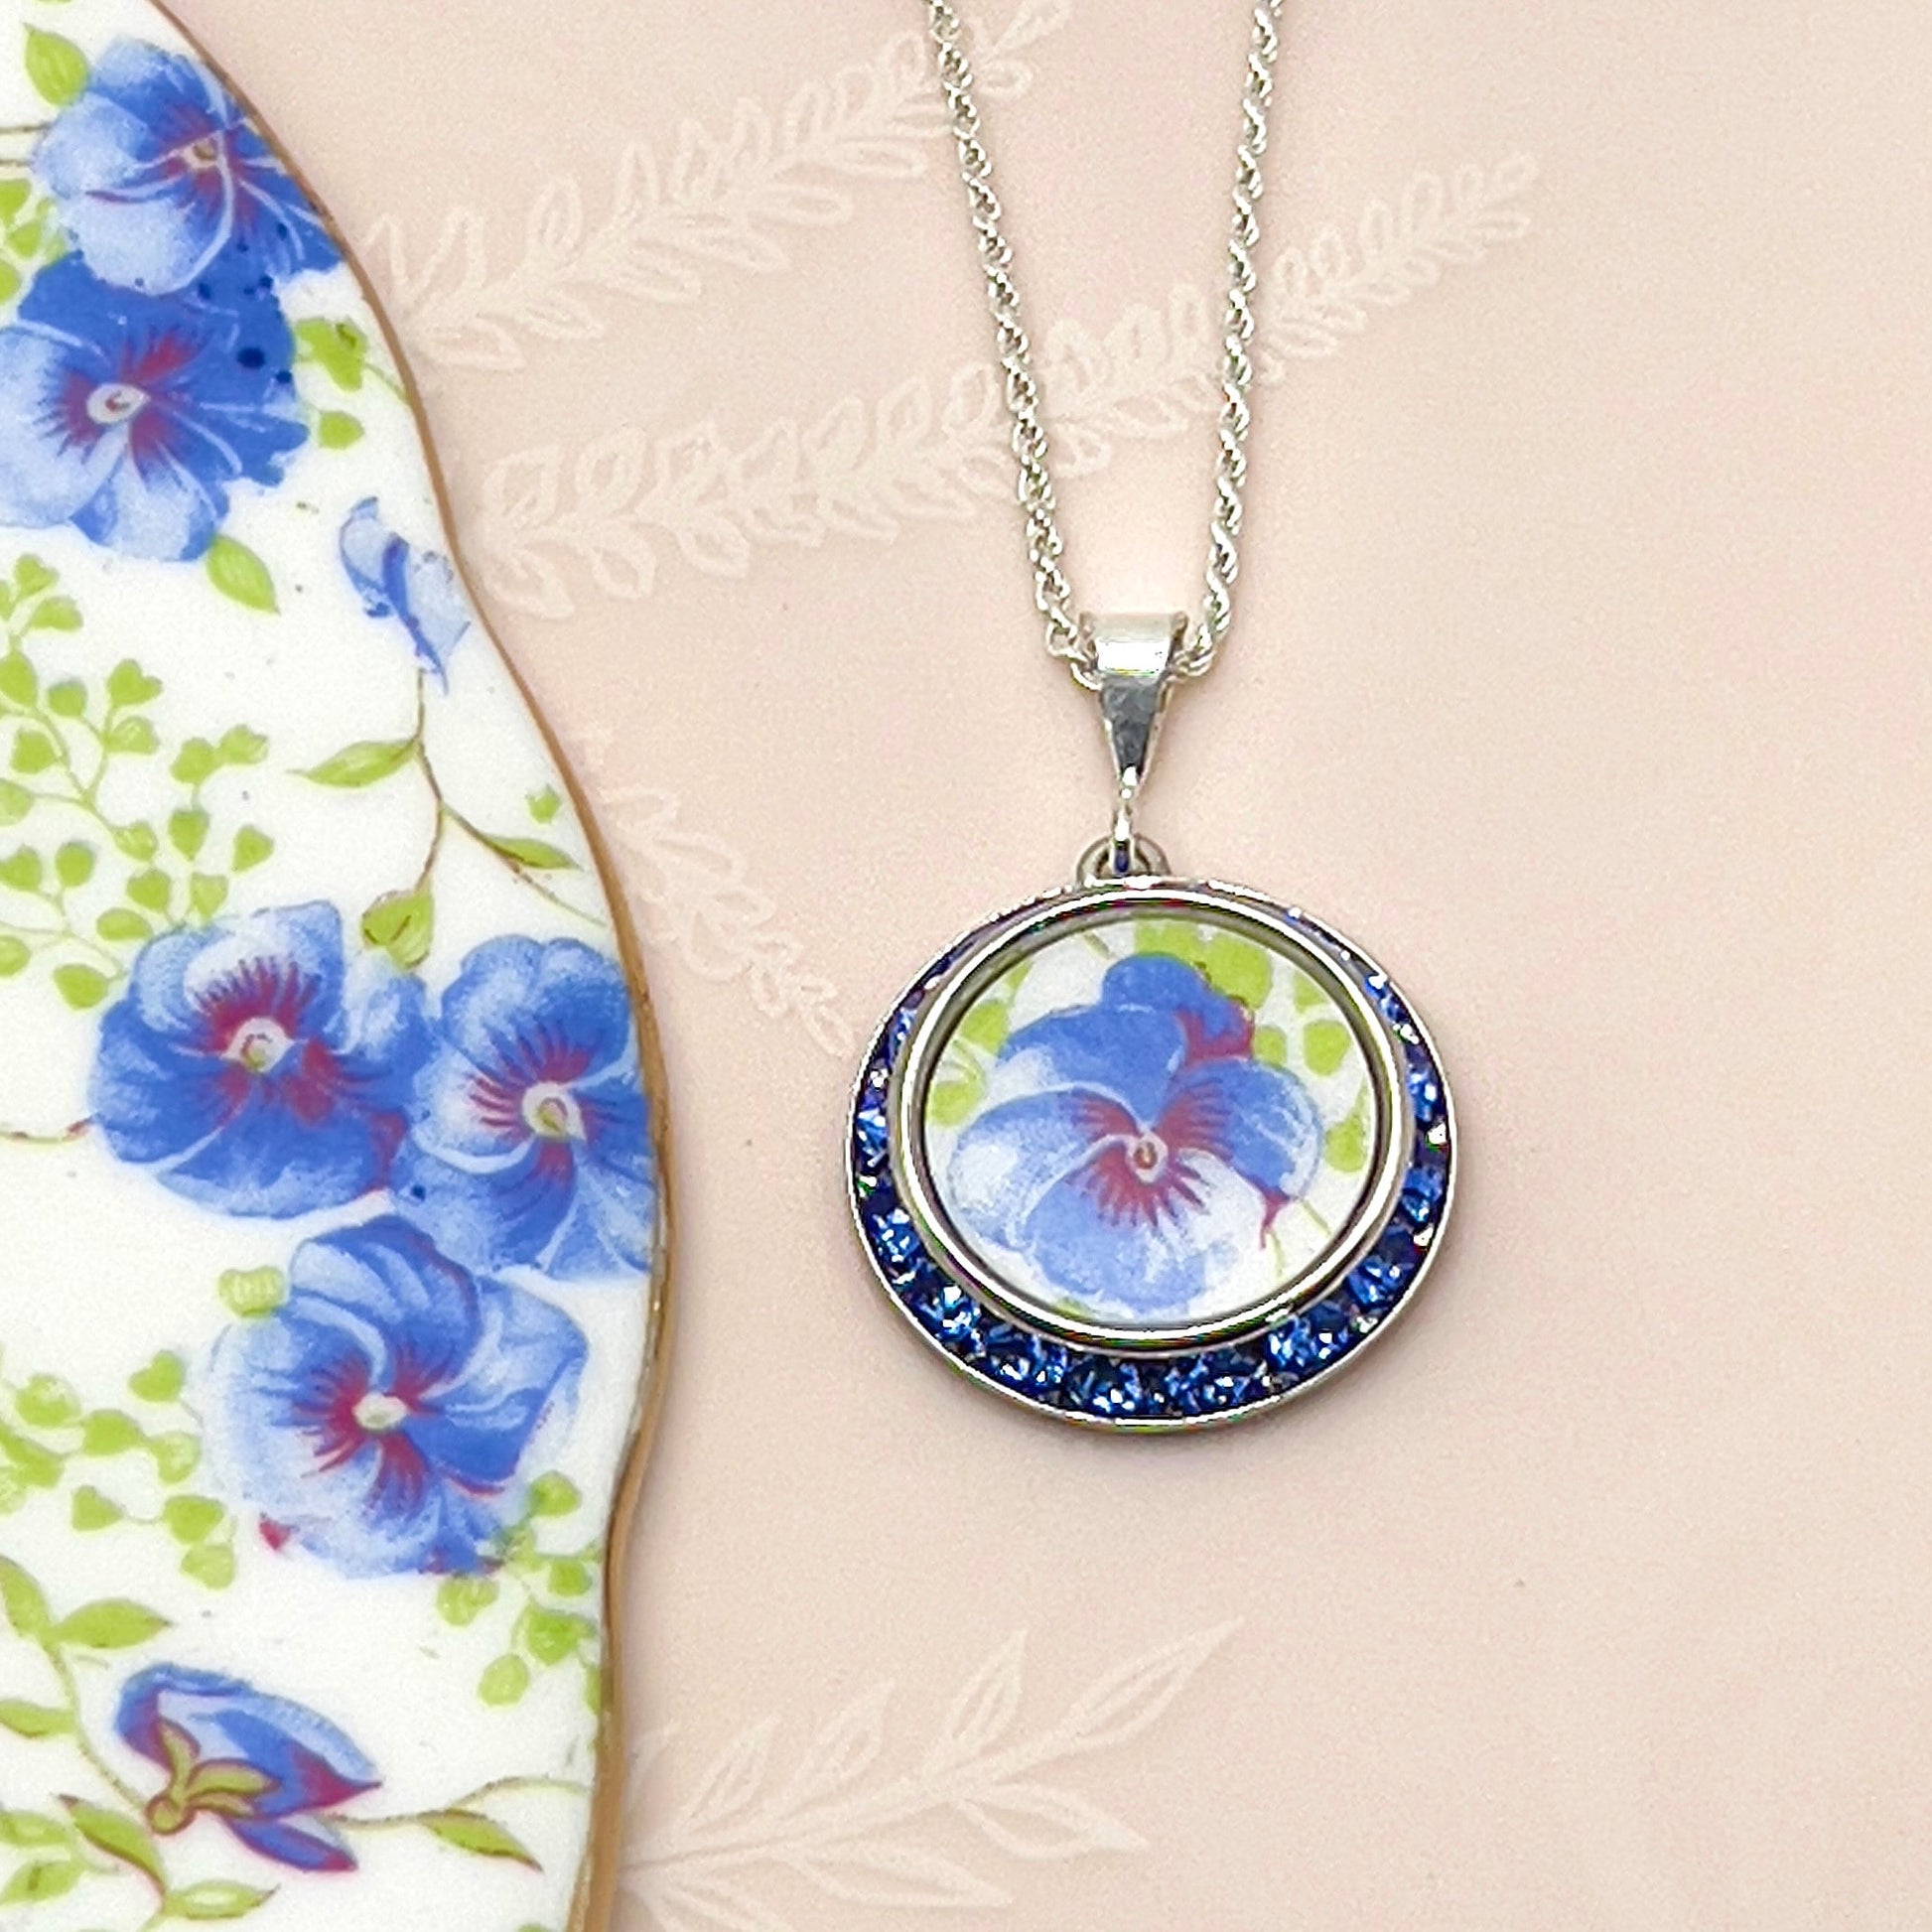 Blue Crystal Pansy Necklace, Unique Broken China Jewelry, Spring Accessories, Gifts for Women